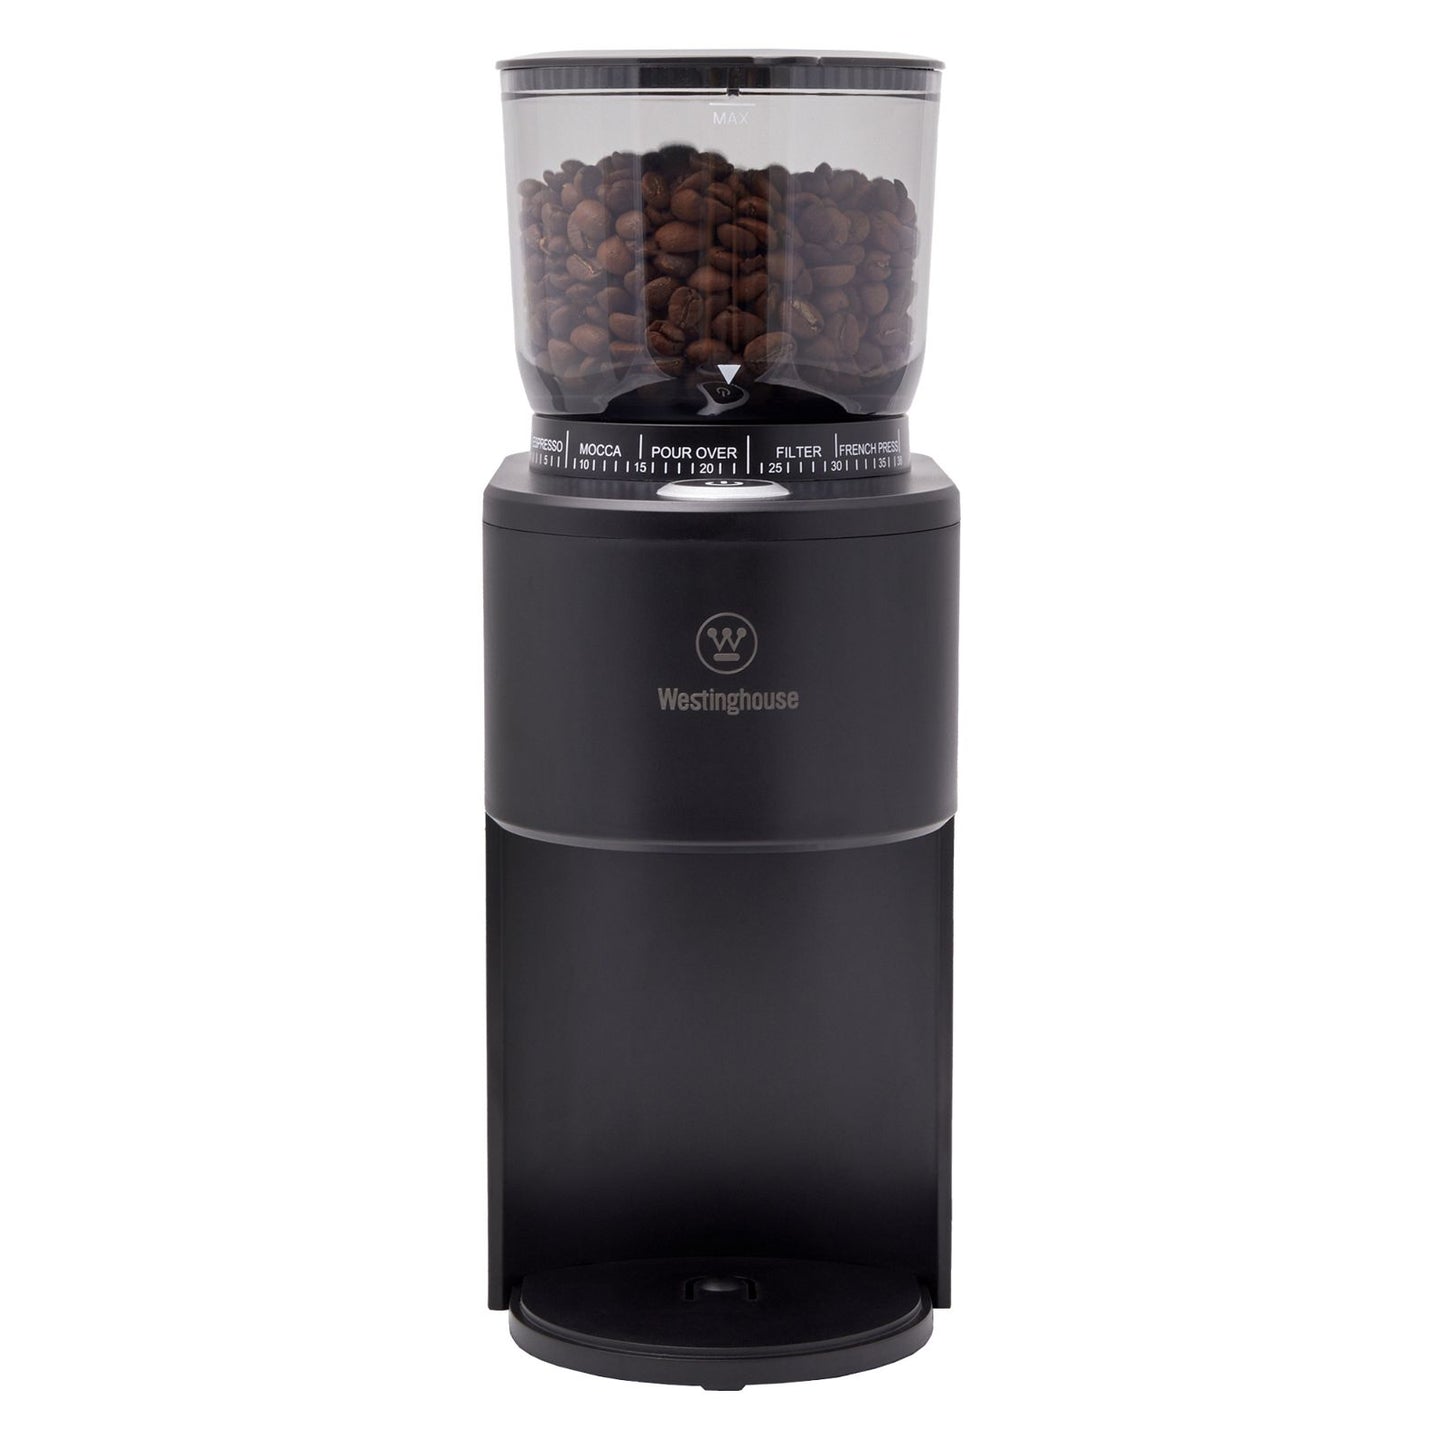 Westinghouse Conical Burr Grinder 160g Black-#product_category#- Distributed by:  under license